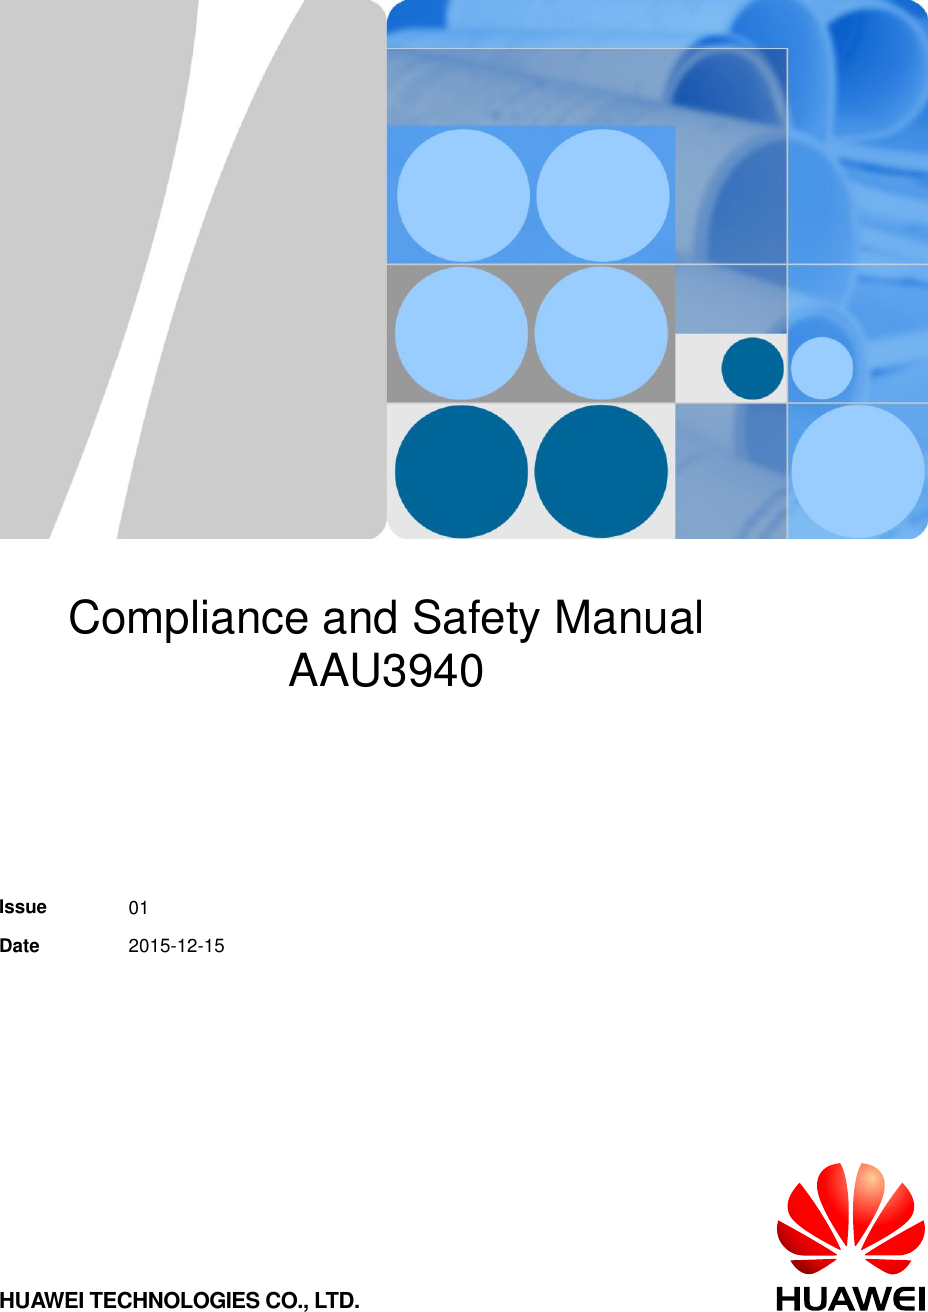          Compliance and Safety Manual AAU3940     Issue 01 Date 2015-12-15 HUAWEI TECHNOLOGIES CO., LTD. 